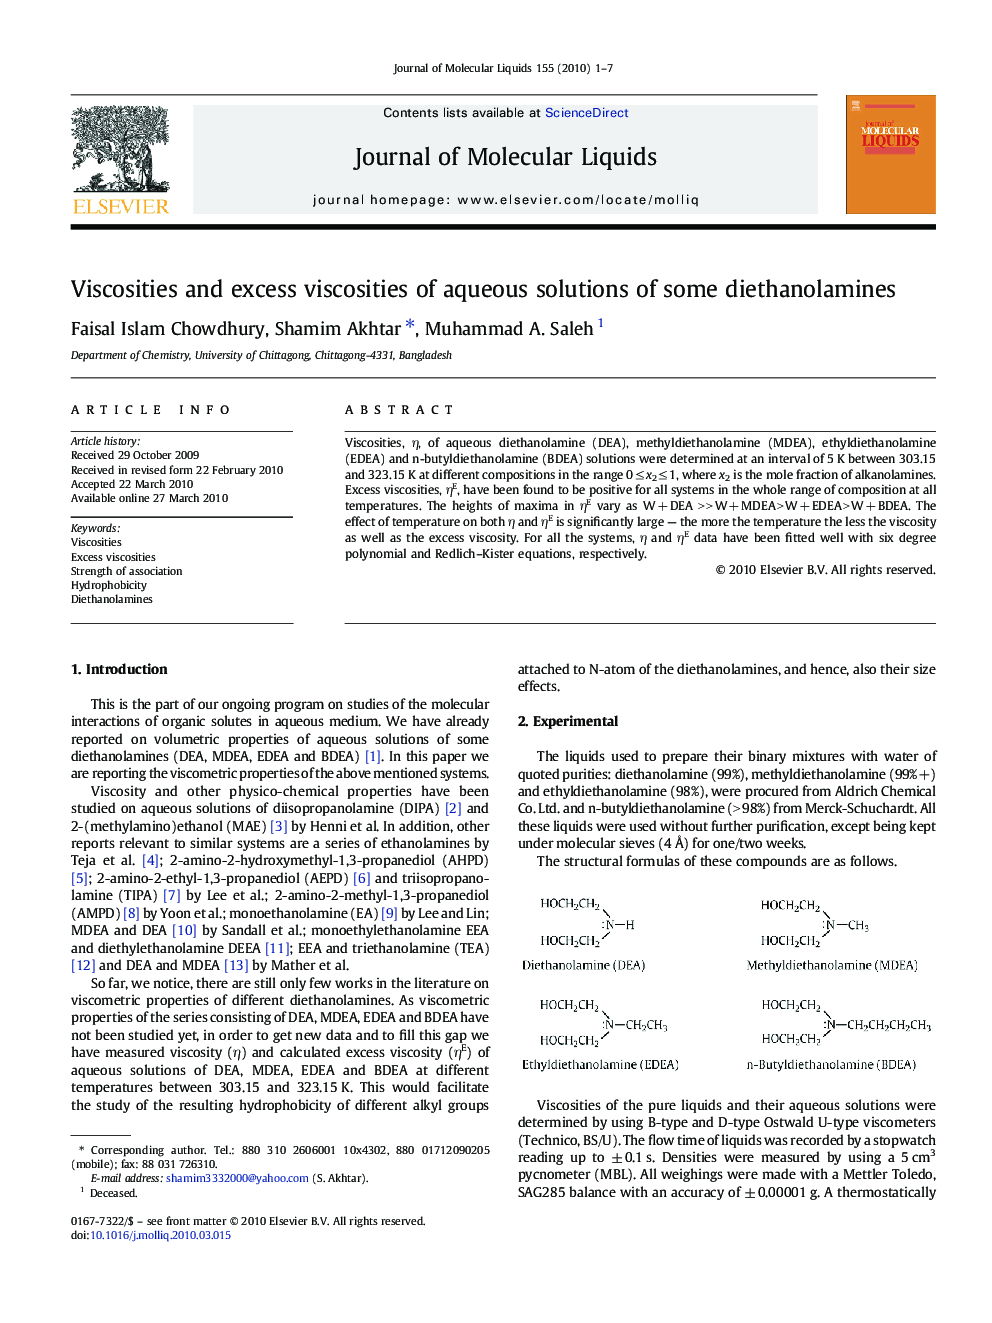 Viscosities and excess viscosities of aqueous solutions of some diethanolamines